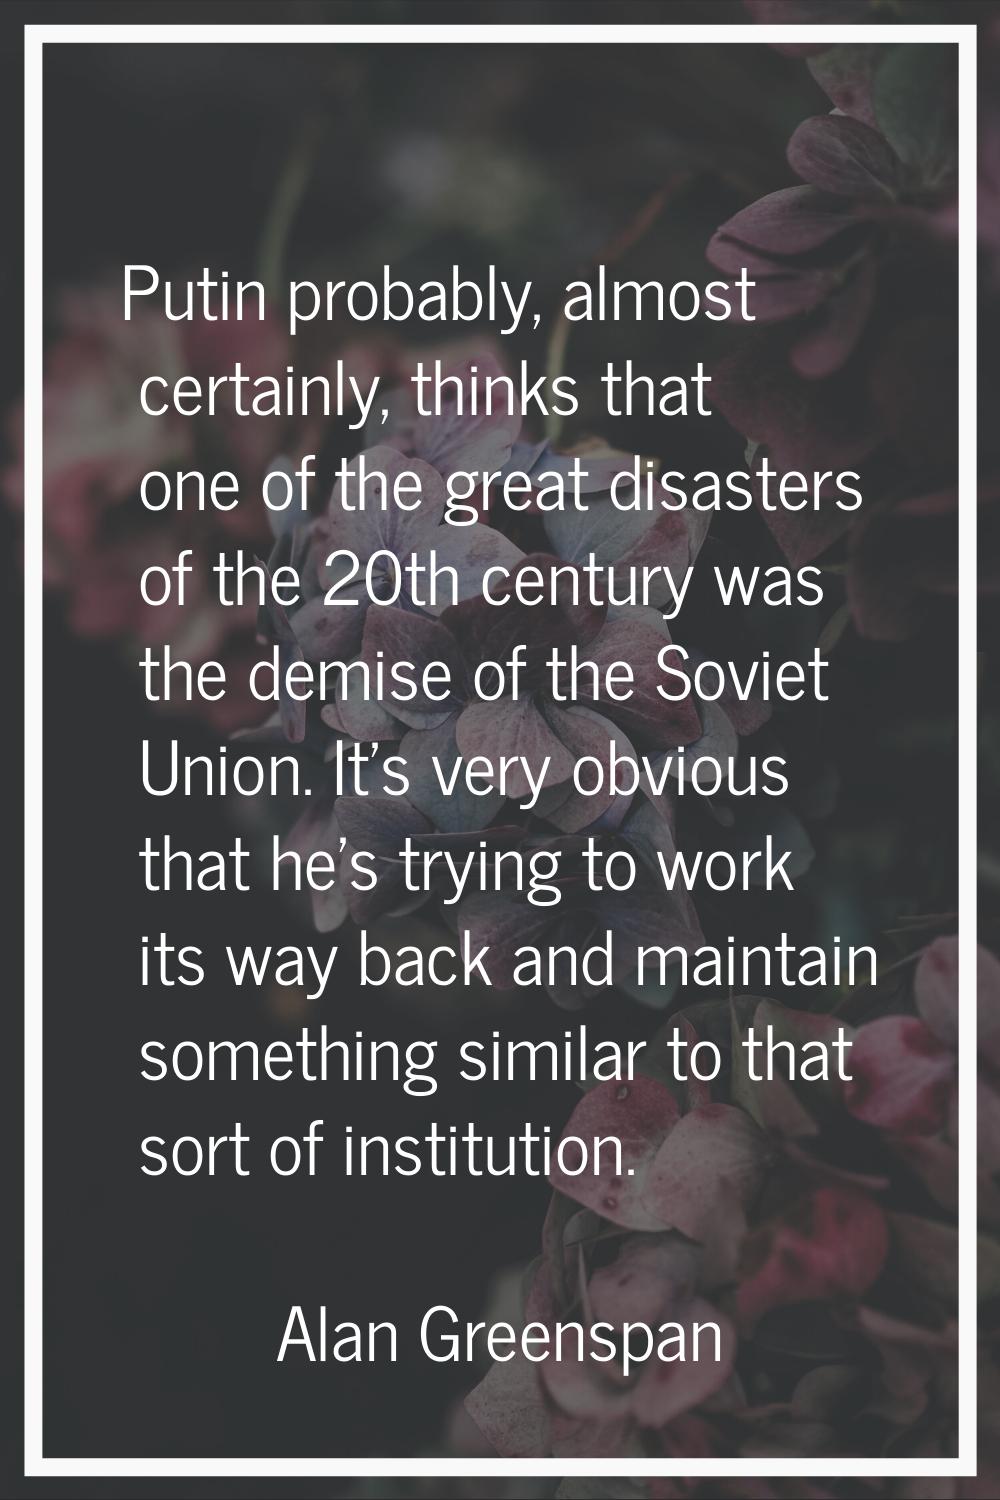 Putin probably, almost certainly, thinks that one of the great disasters of the 20th century was th